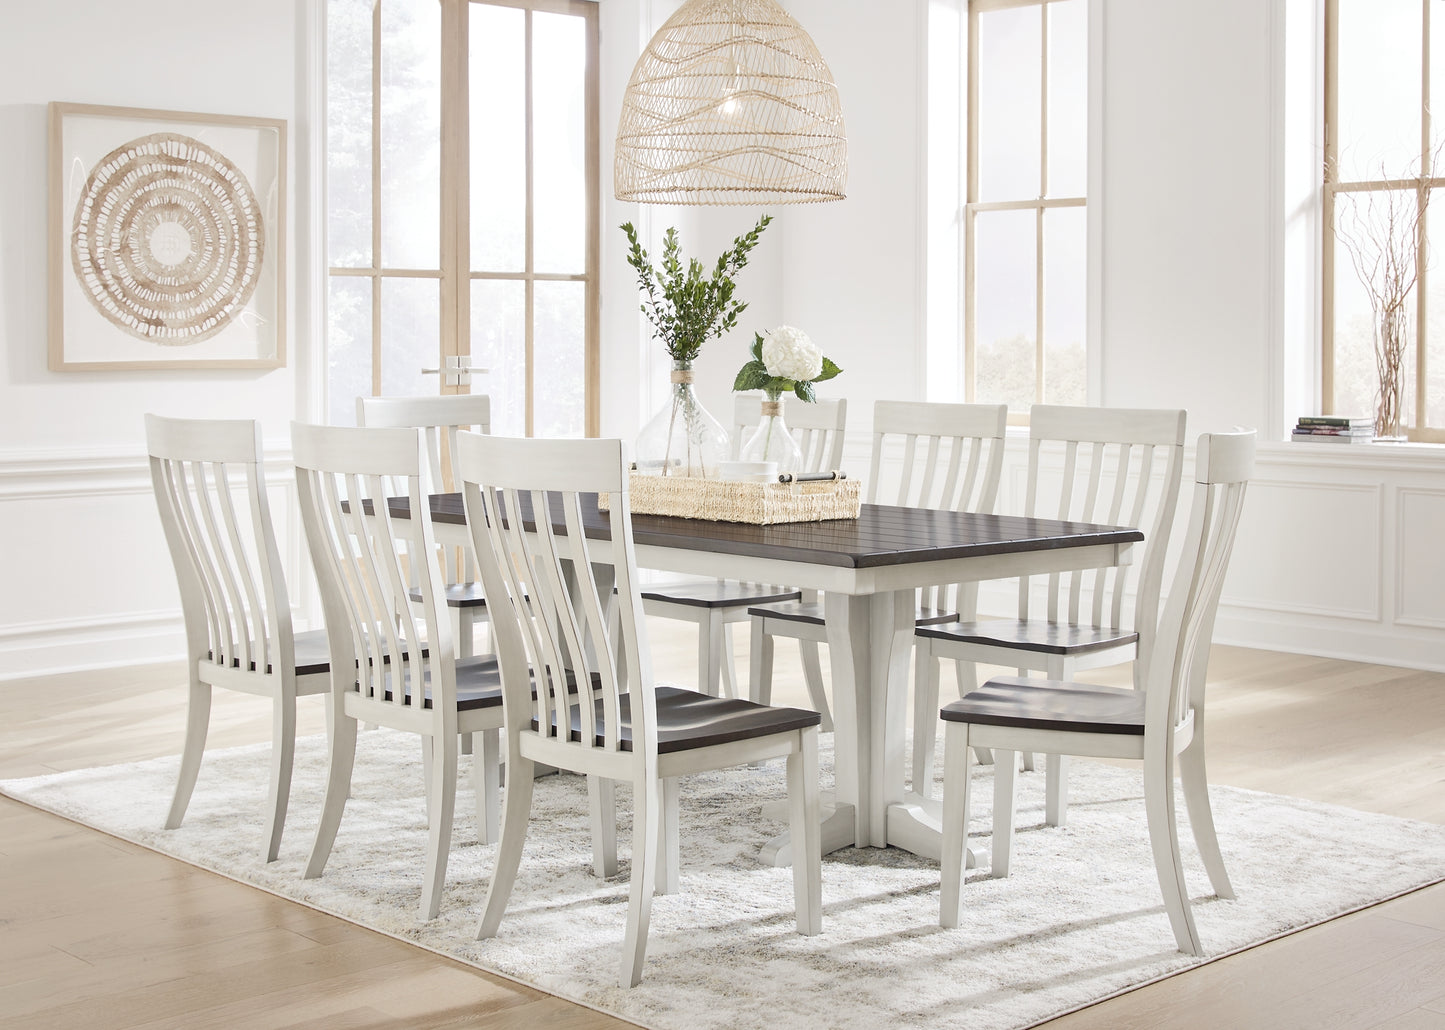 Darborn Dining Table and 8 Chairs JB's Furniture  Home Furniture, Home Decor, Furniture Store